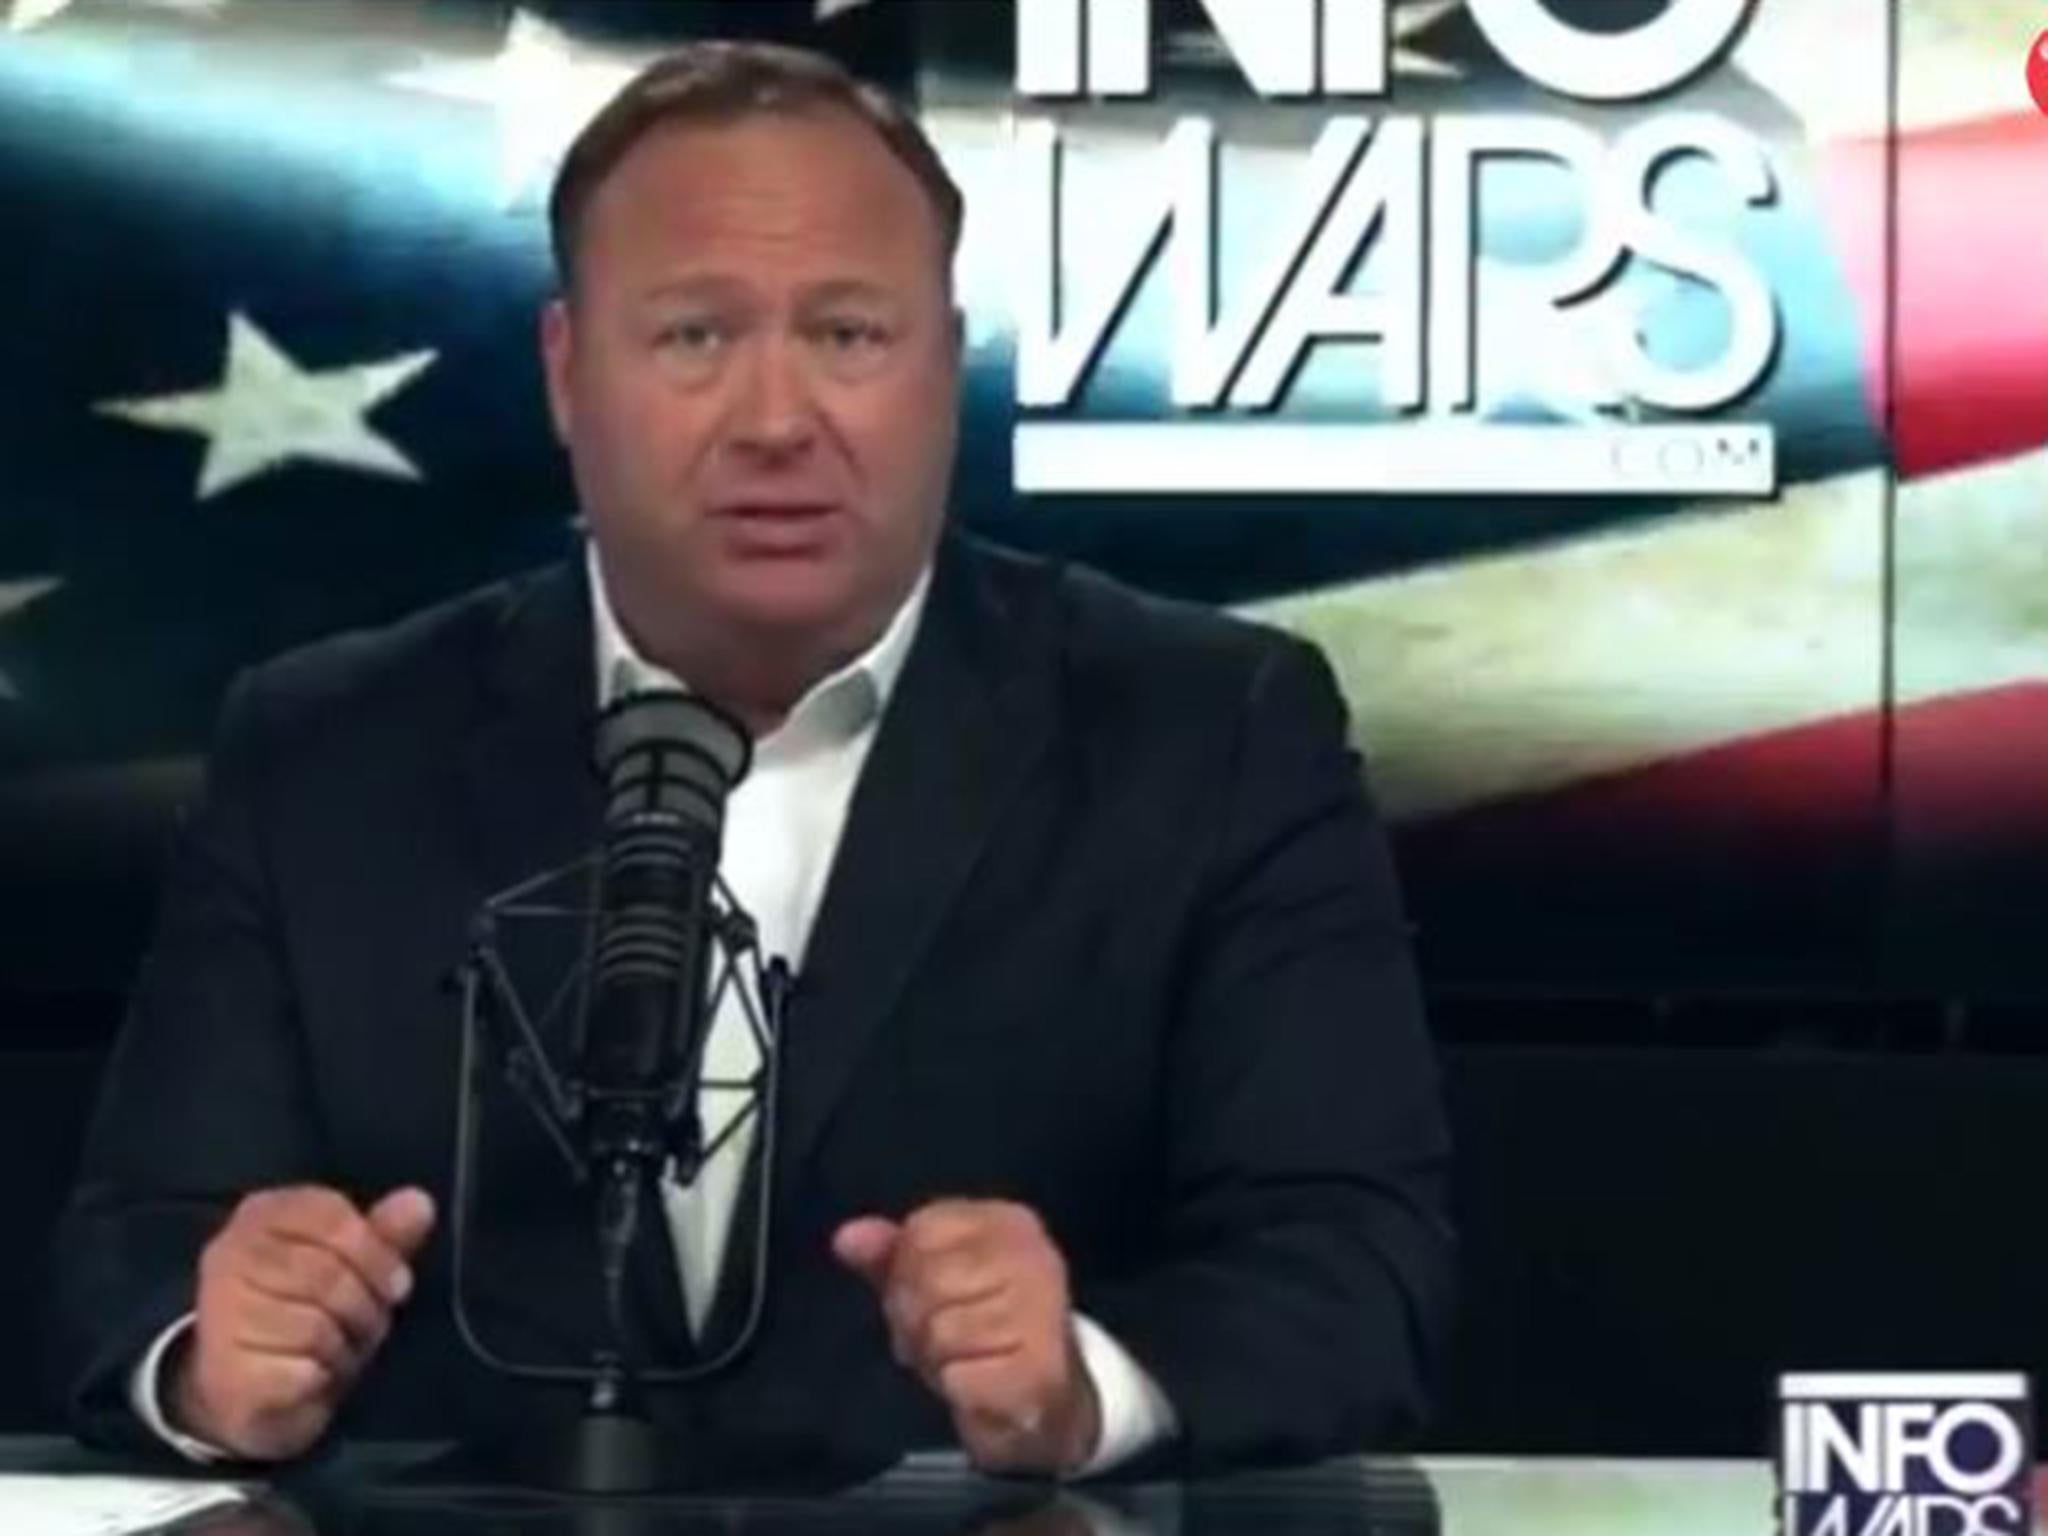 Alex Jones, has been dubbed America’s leading conspiracy theorist and a prominent voice of the so-called 'alt-right' movement in the US